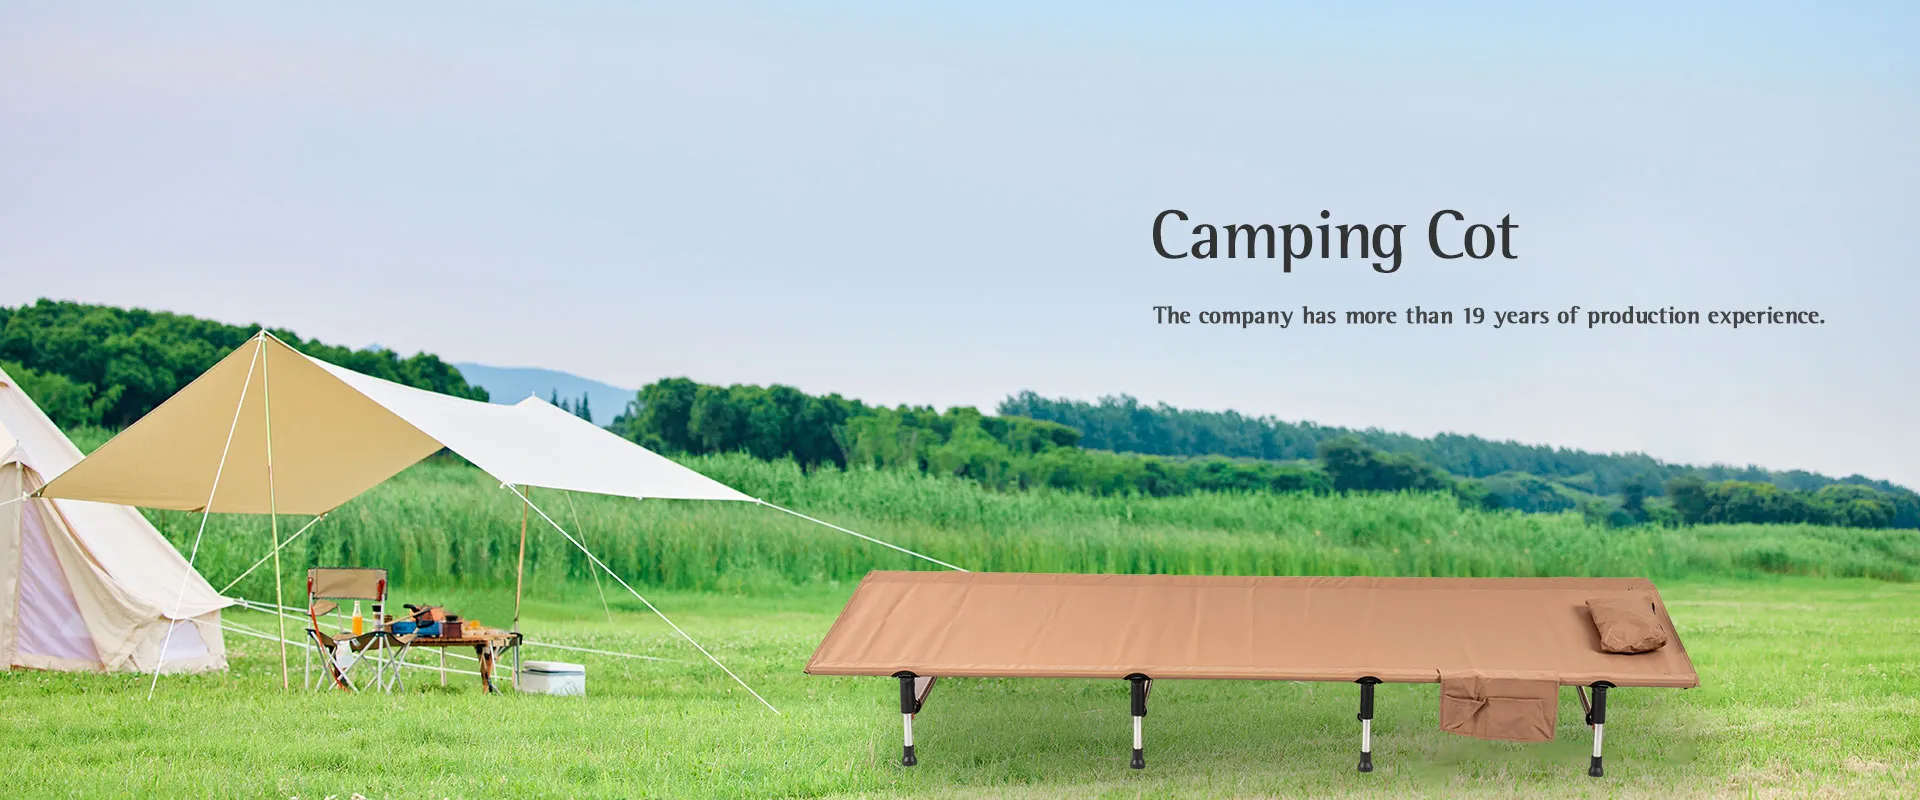 China Camping Cot Manufacturer and Supplier